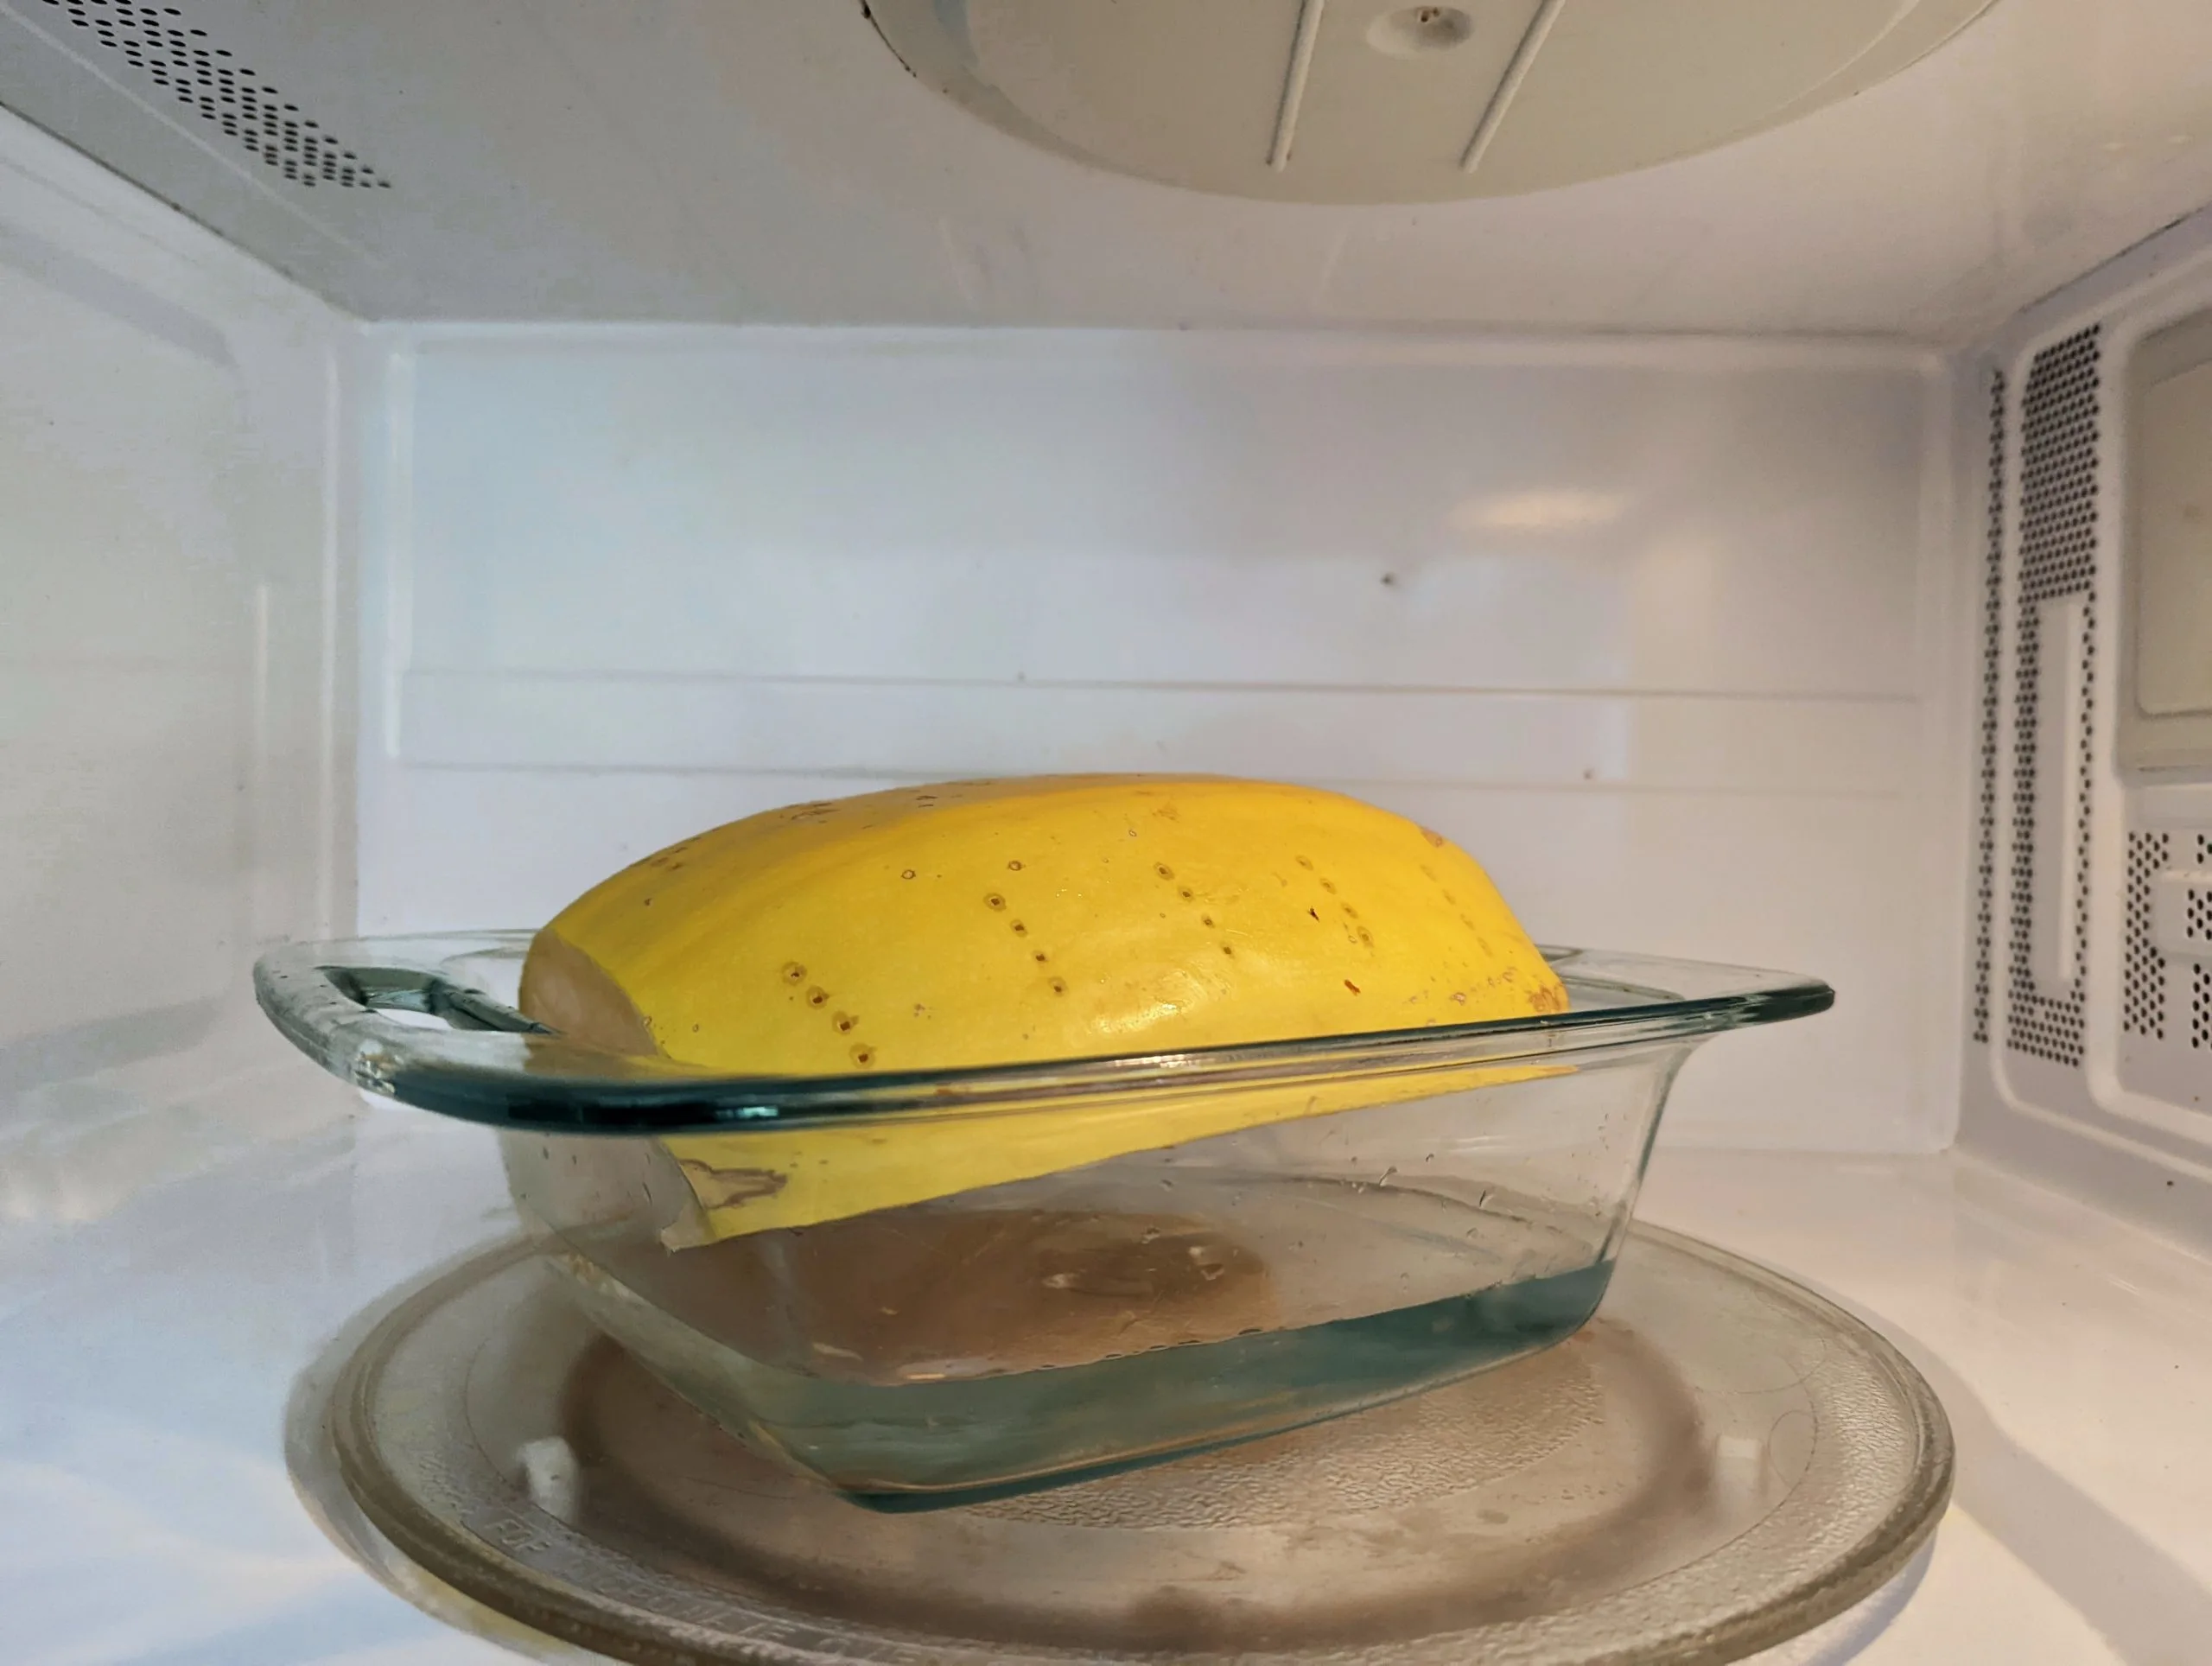 Spaghetti squash cooking in the microwave.